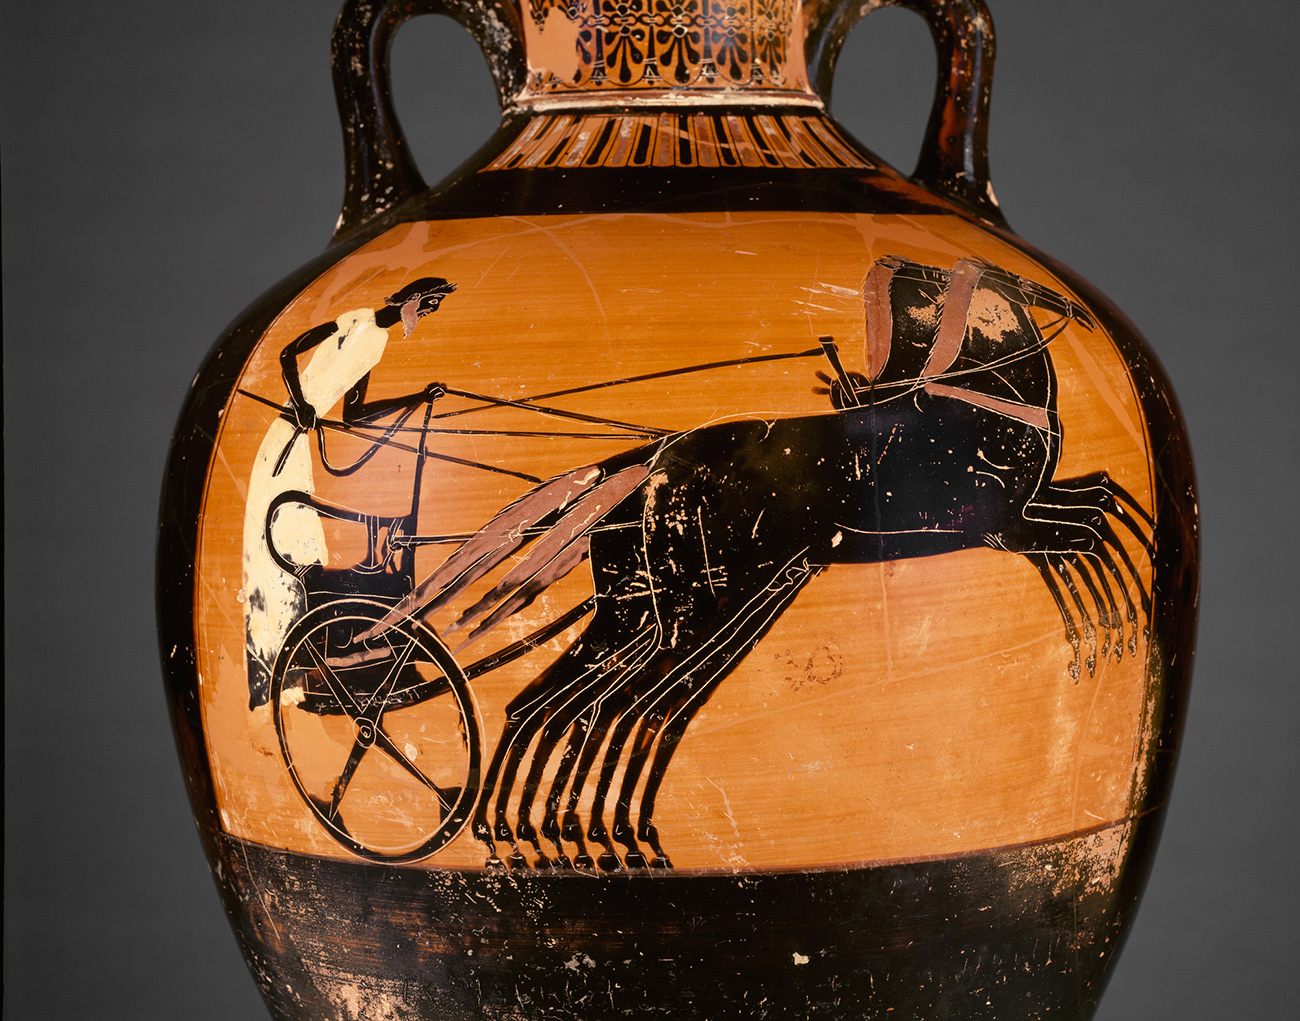 Vase painting showing a charioteer racing to victory in a four-horse chariot